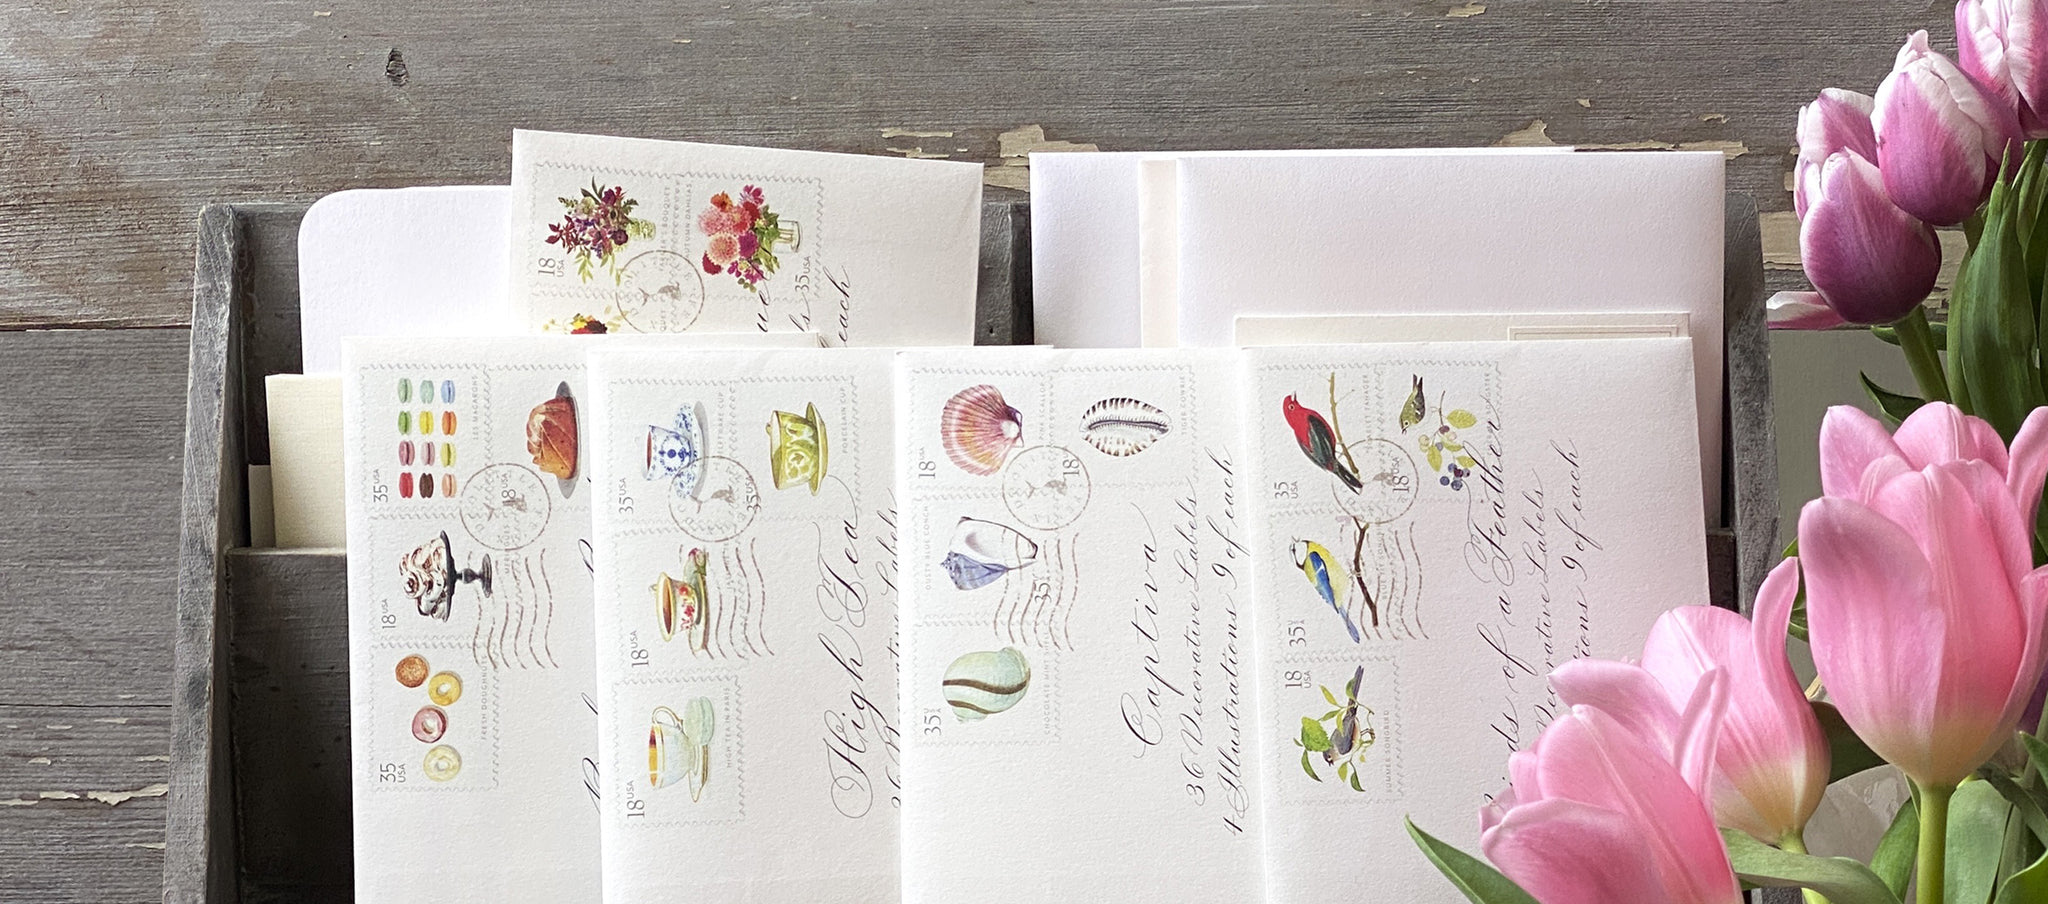 Decorative Labels - Stamp-like stickers that add delight to hand-delivered and sent correspondence.